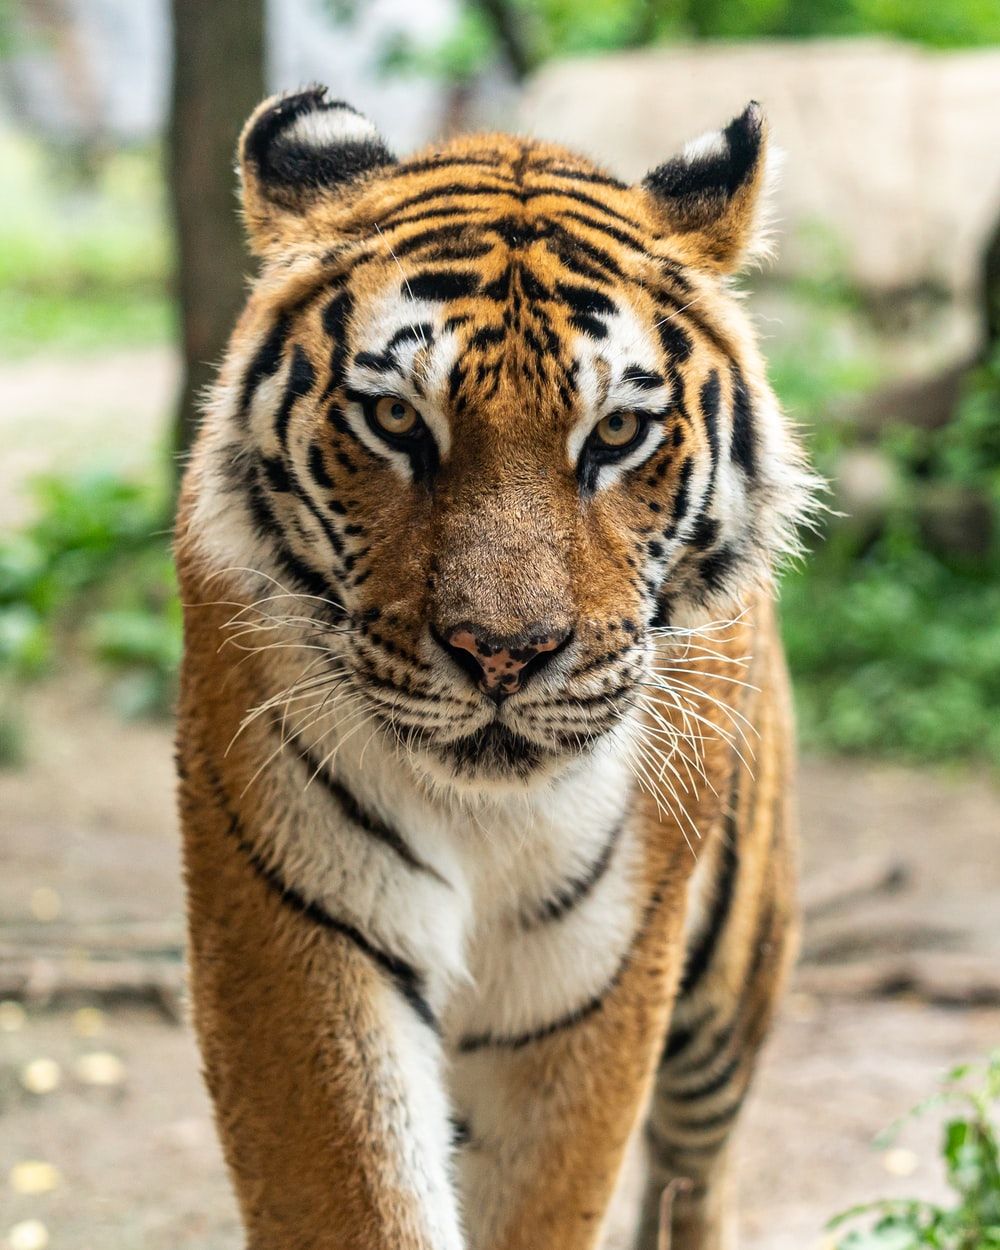 Tiger Picture. Download Free Image .com